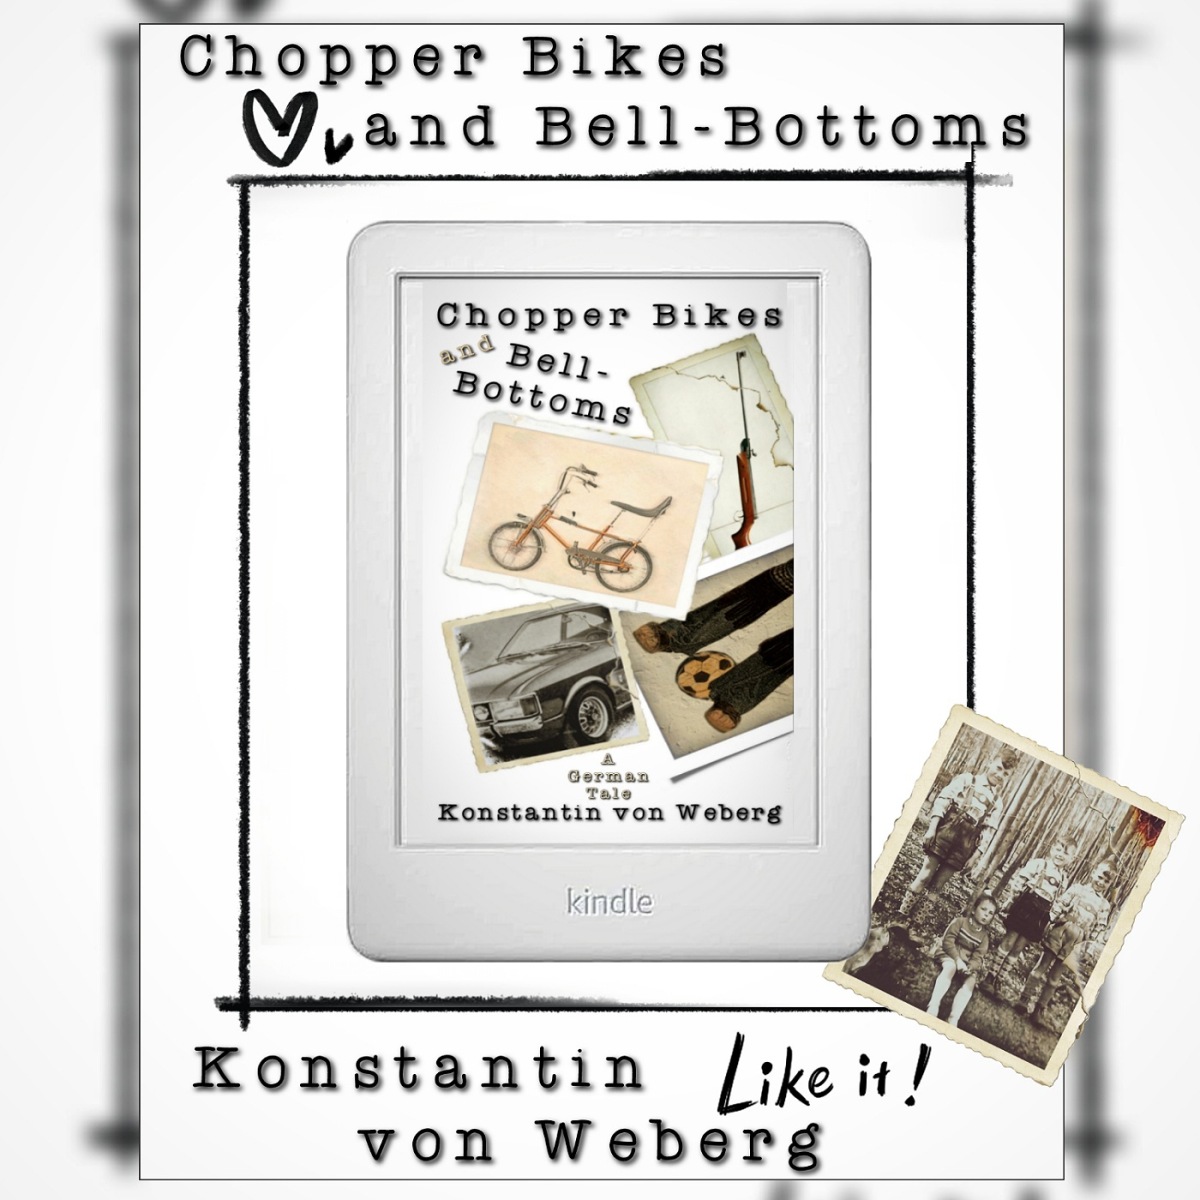 ‚Chopper Bikes and Bell-Bottoms‘ An Amazon Kindle ebook with all features